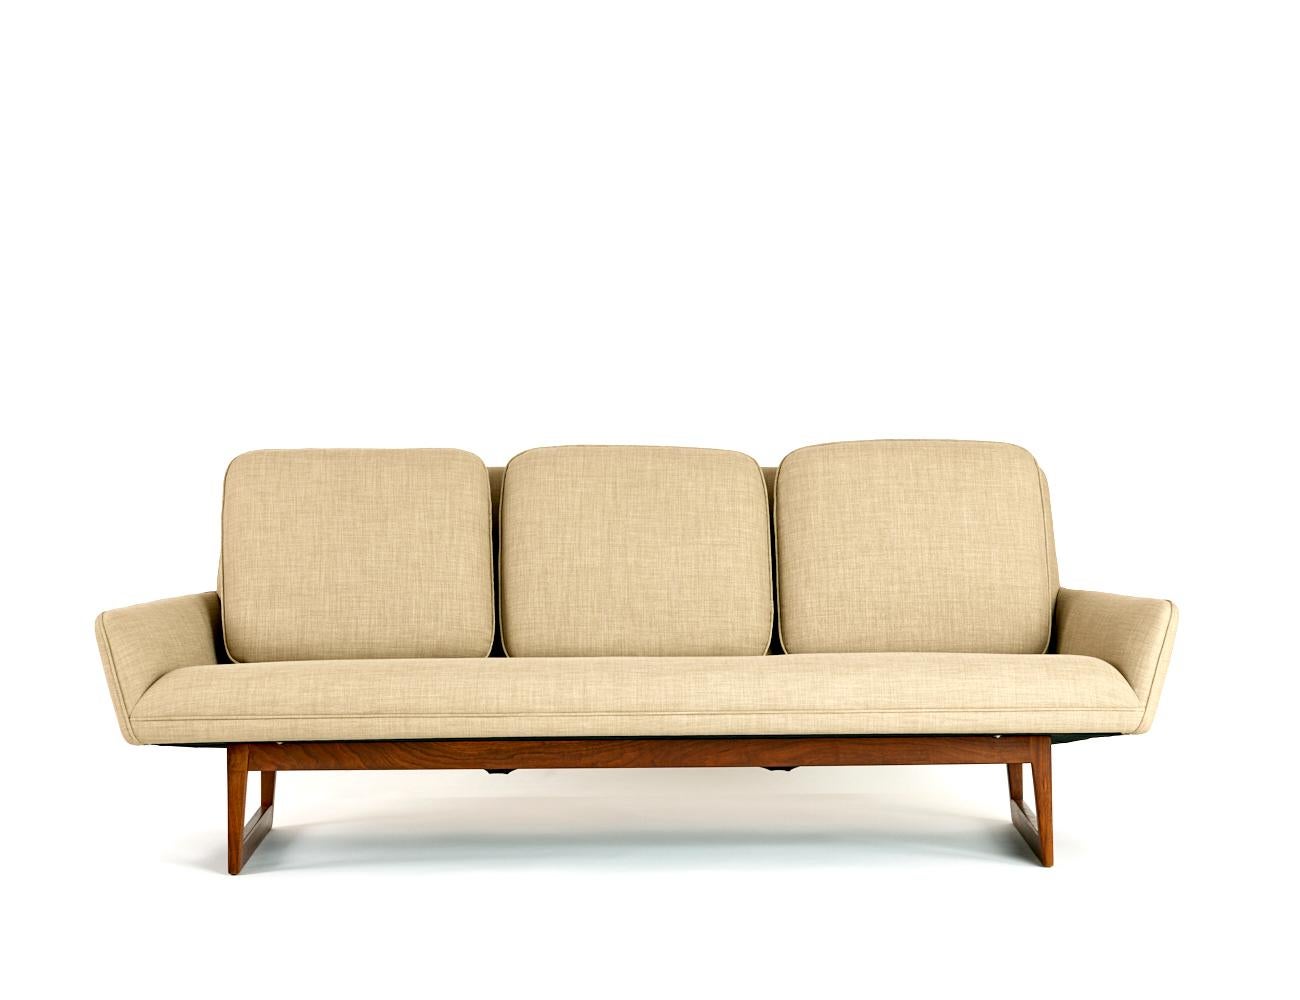 Pair of Jens Risom Sofas

USA Designed and made in the 1960s

Original teak frames with new upholstery and three back seat cushions

  